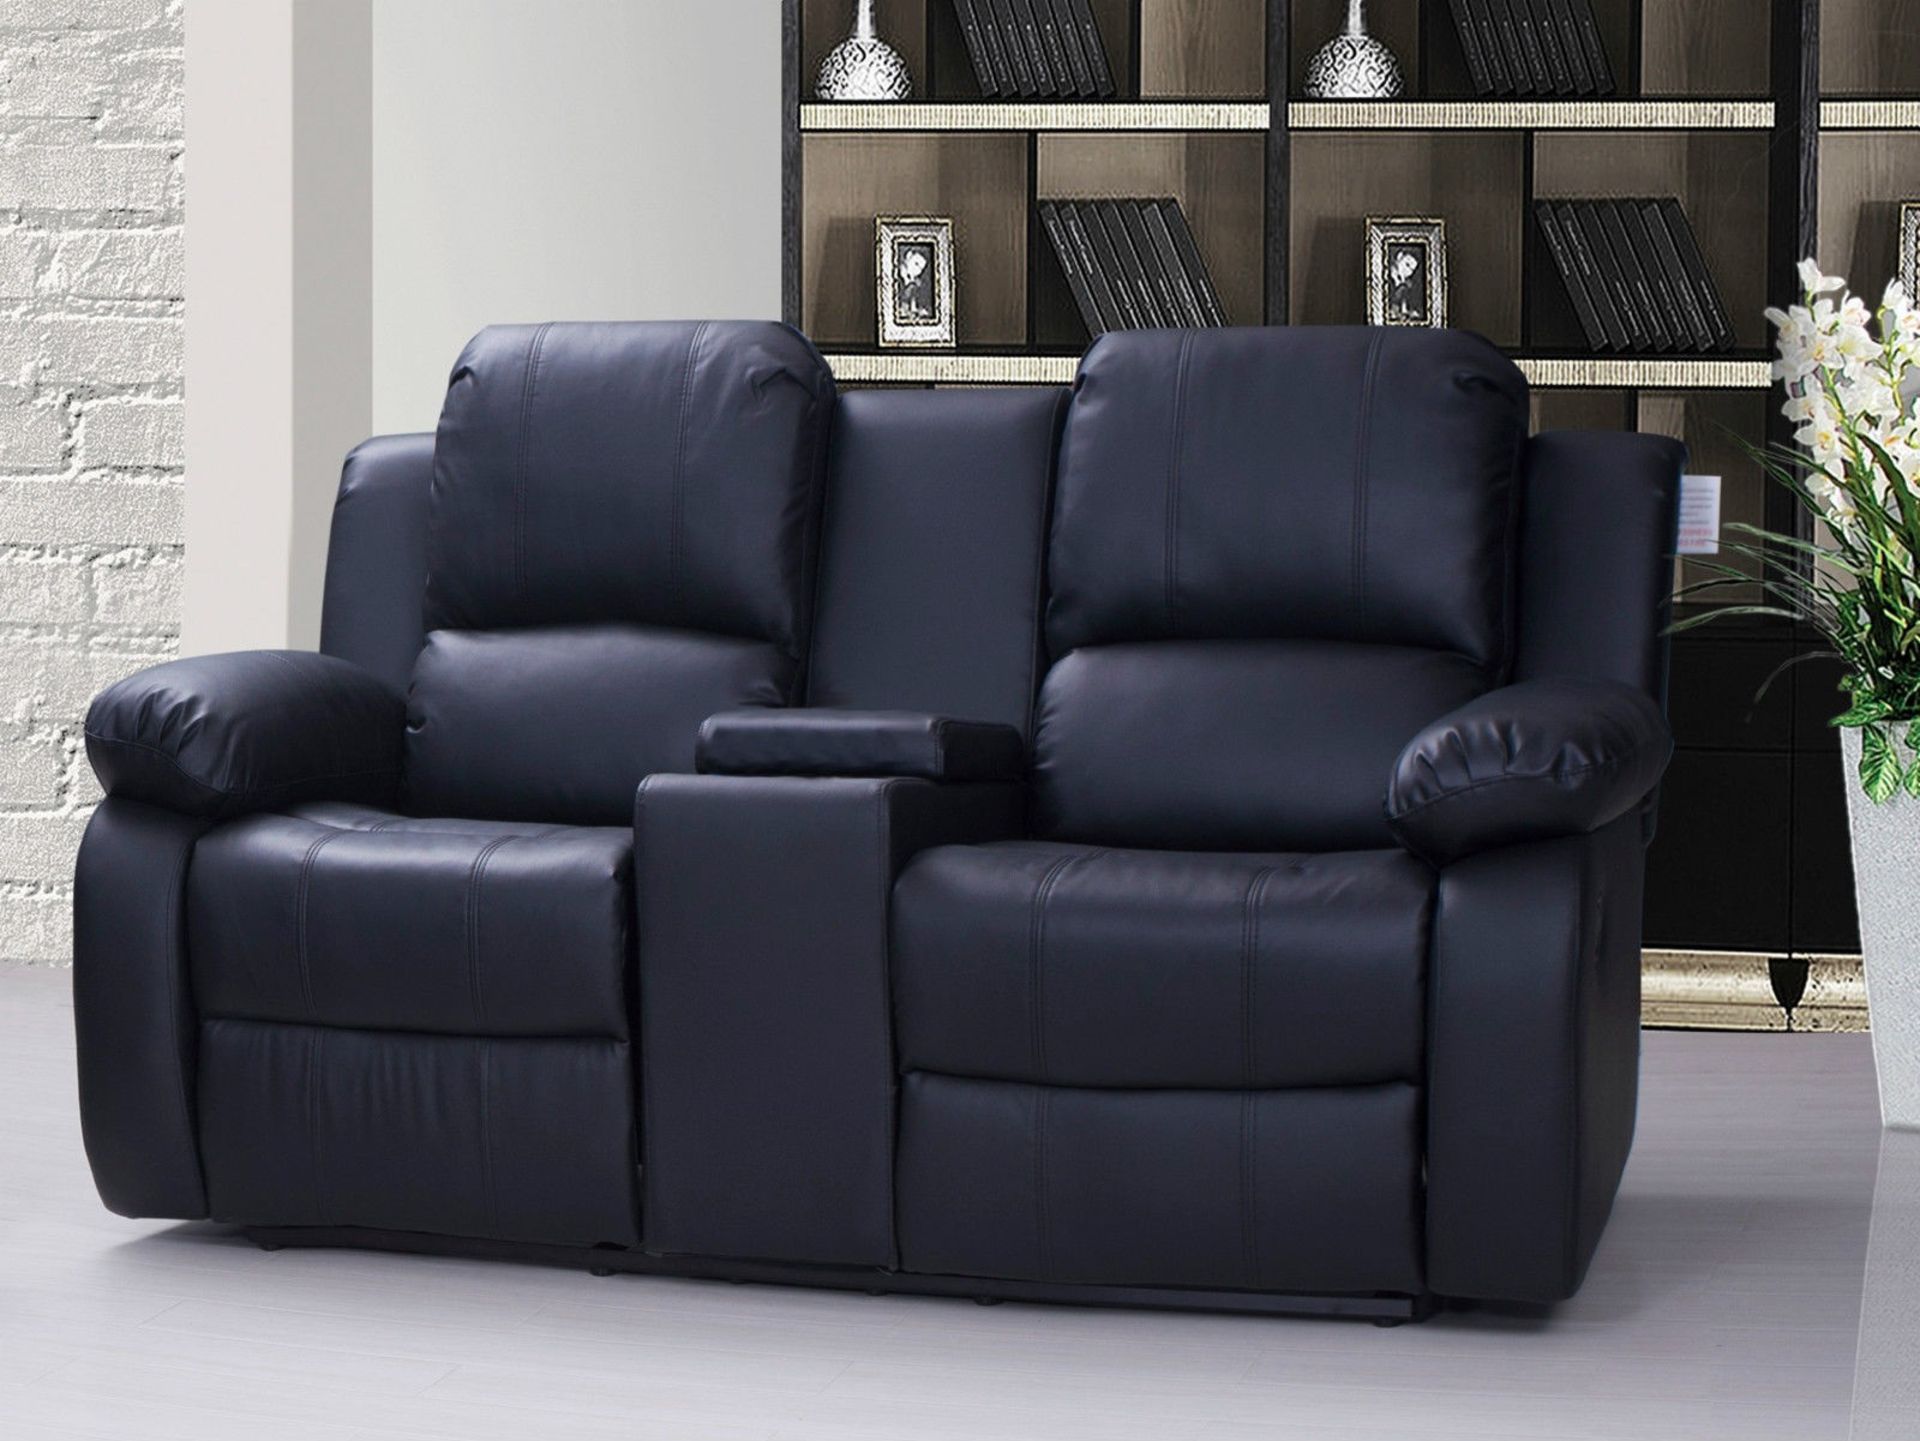 Brand New 2 Seater Manhattan Manual Reclining Sofa With Console And Drinks Holder In Black Leather